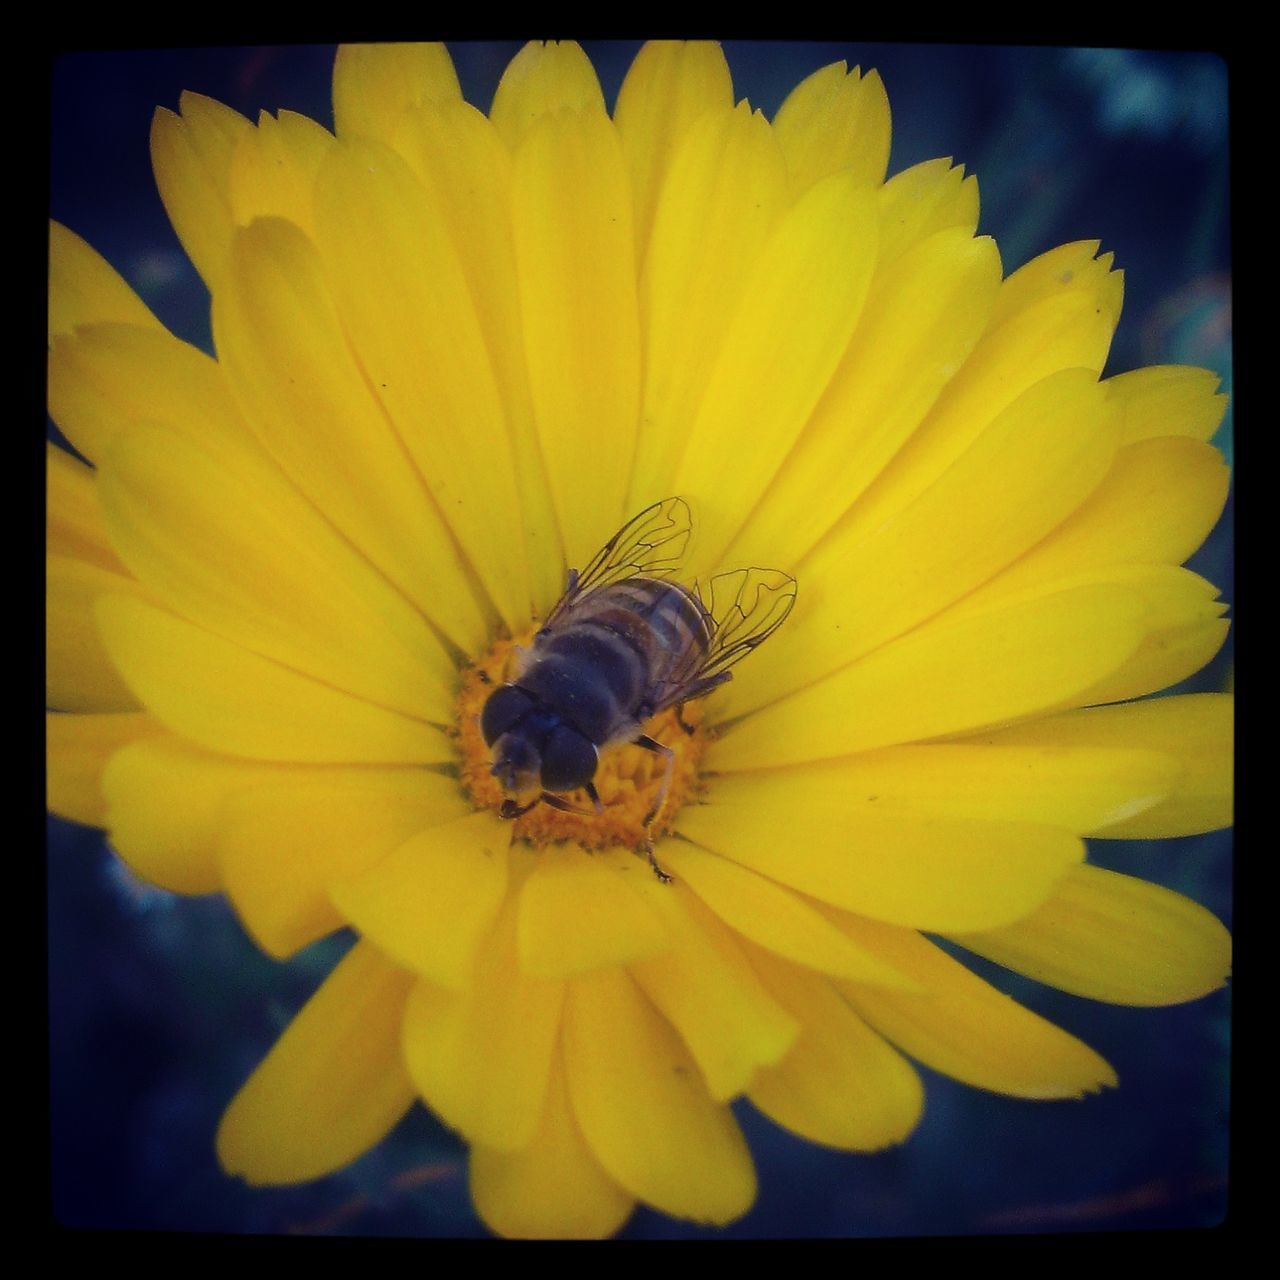 flower, transfer print, petal, yellow, flower head, one animal, insect, freshness, fragility, wildlife, auto post production filter, animals in the wild, animal themes, pollen, single flower, beauty in nature, close-up, nature, growth, bee